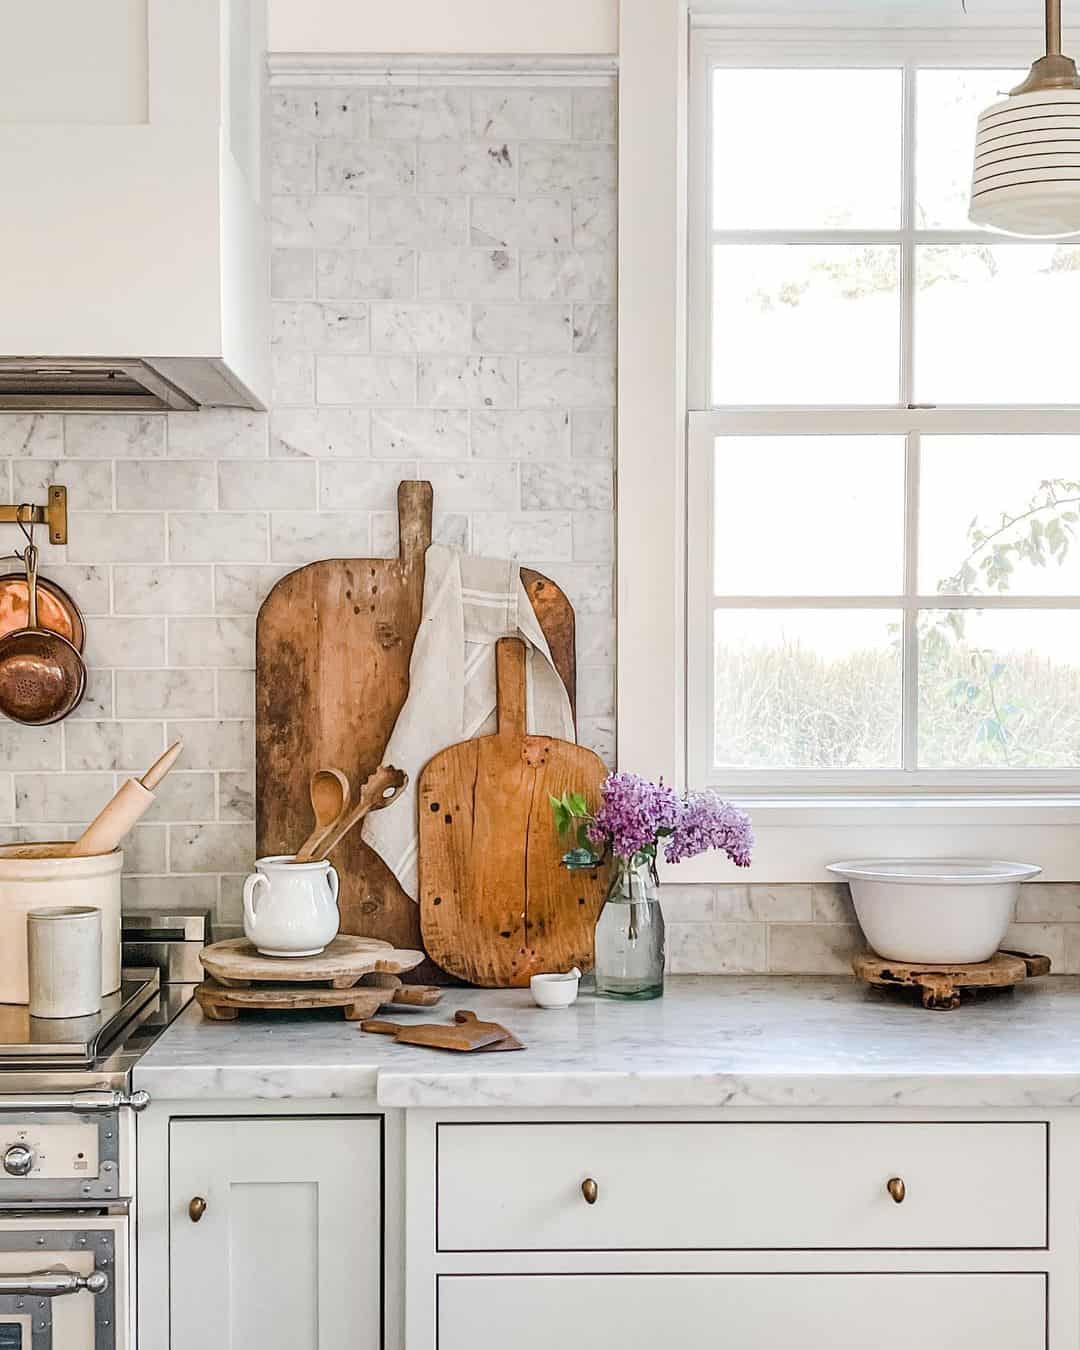 Rustic Elegance with a Marbled Backsplash Surrounding a White-Trimmed Window